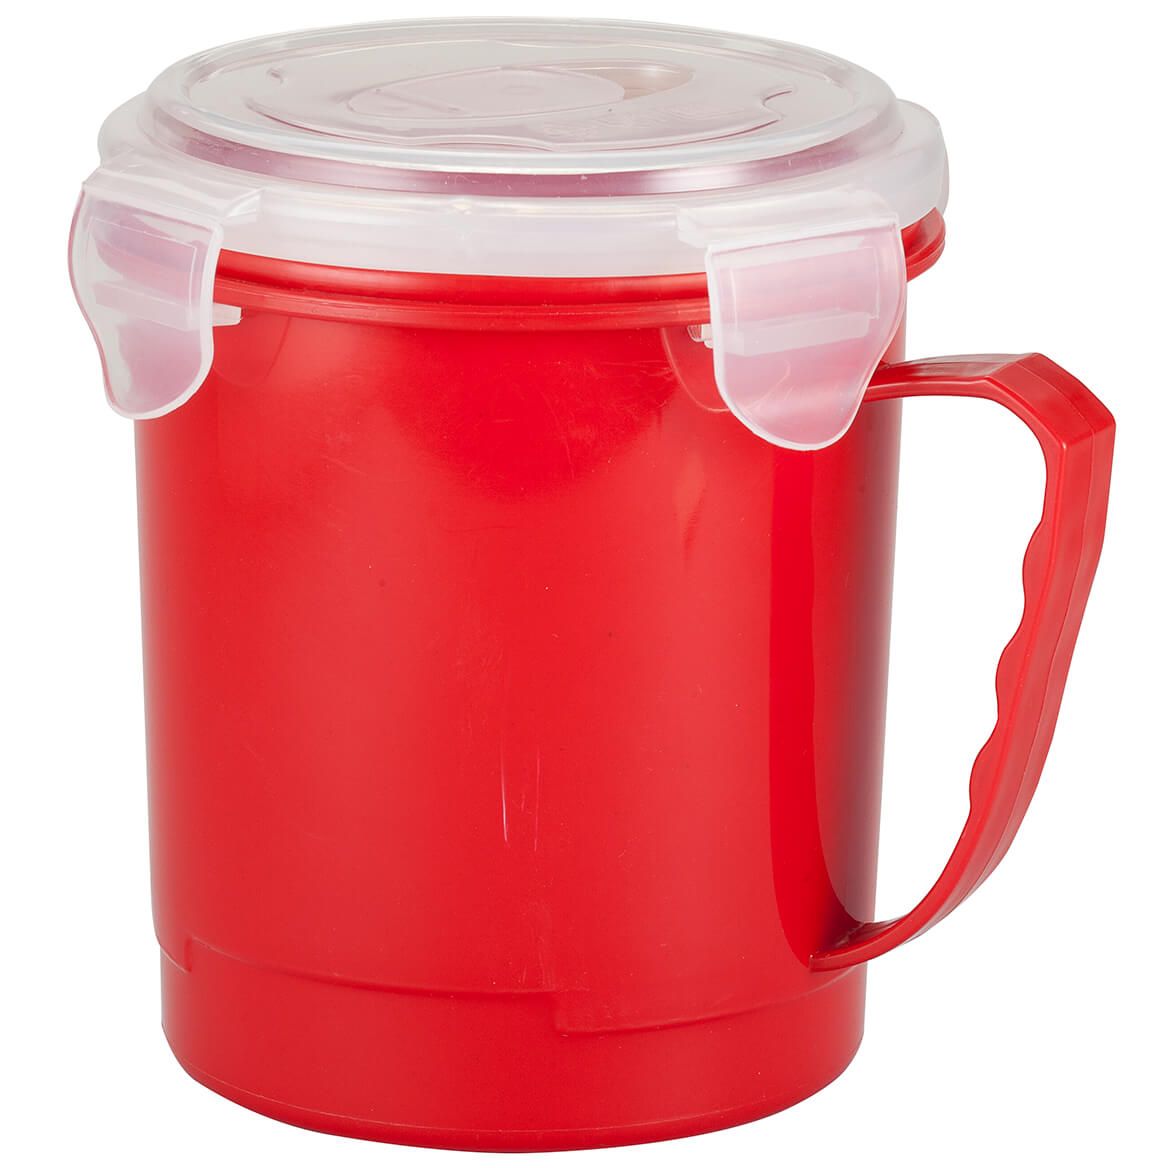 22-oz. Microwave Soup Mug with Vented Lid by Chef's Pride™ + '-' + 367541